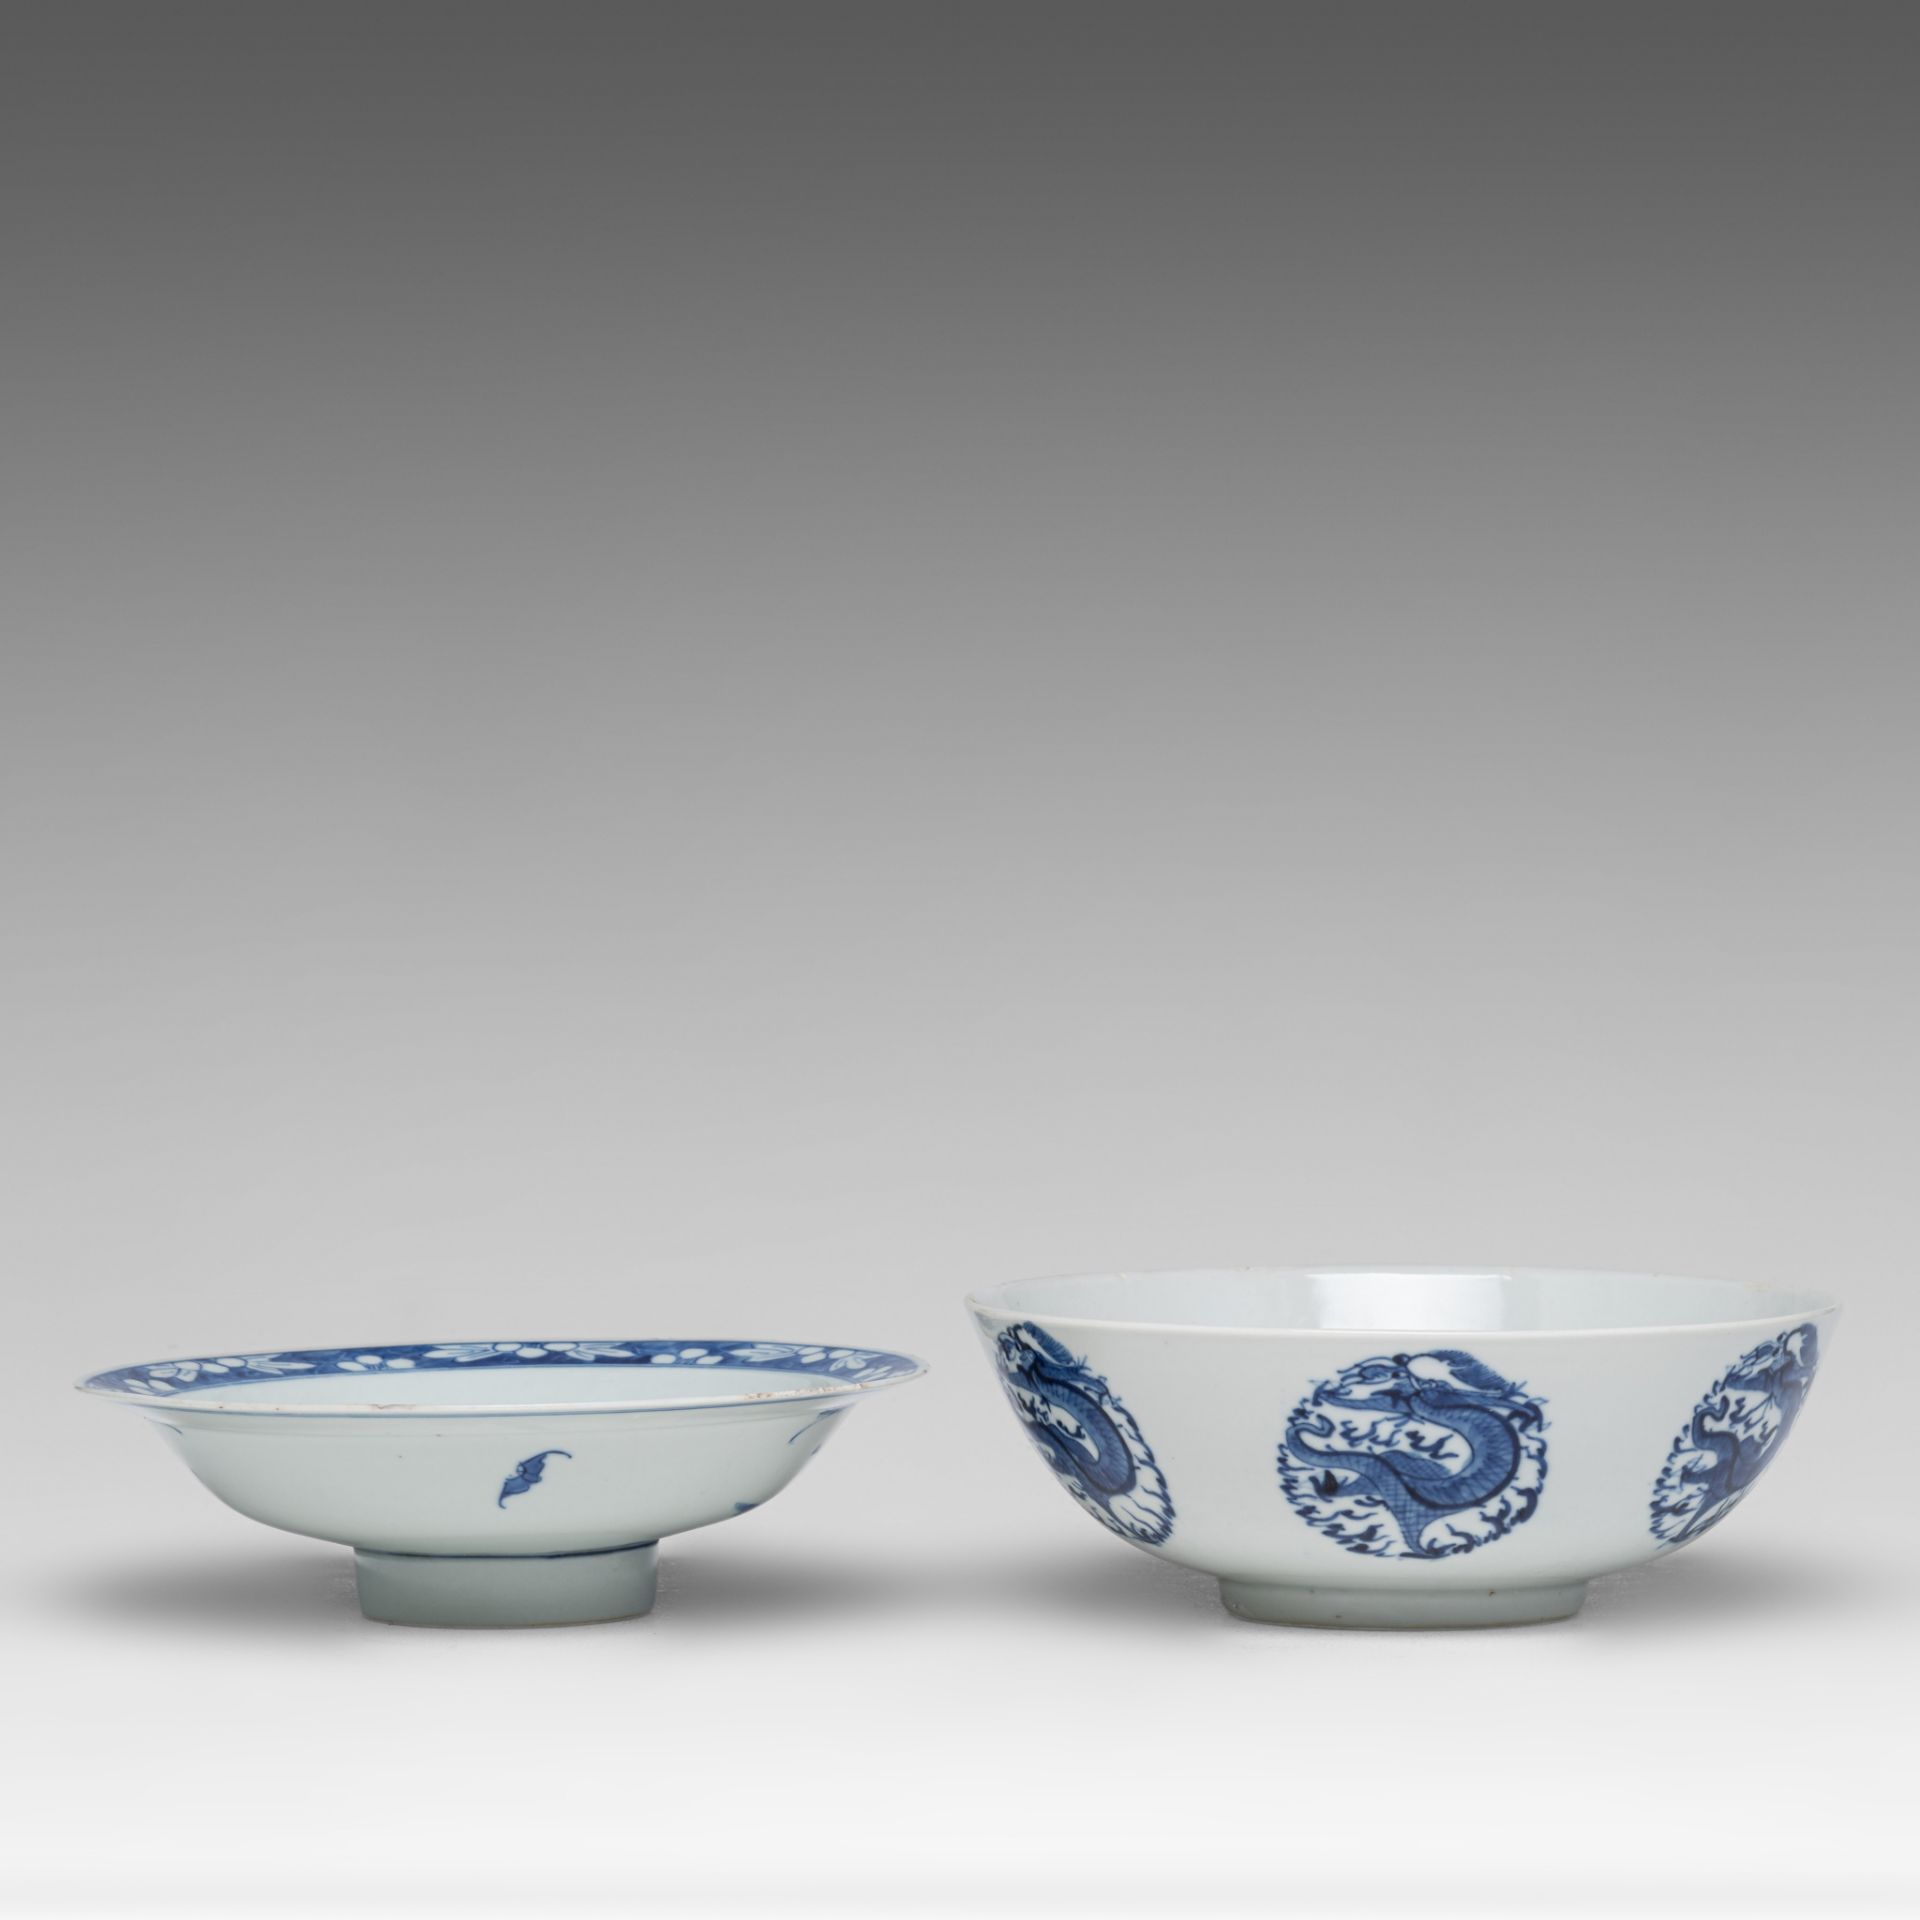 A collection of Chinese blue and white bowls and a pair of celadon vases, late 19thC/Republic period - Image 7 of 19